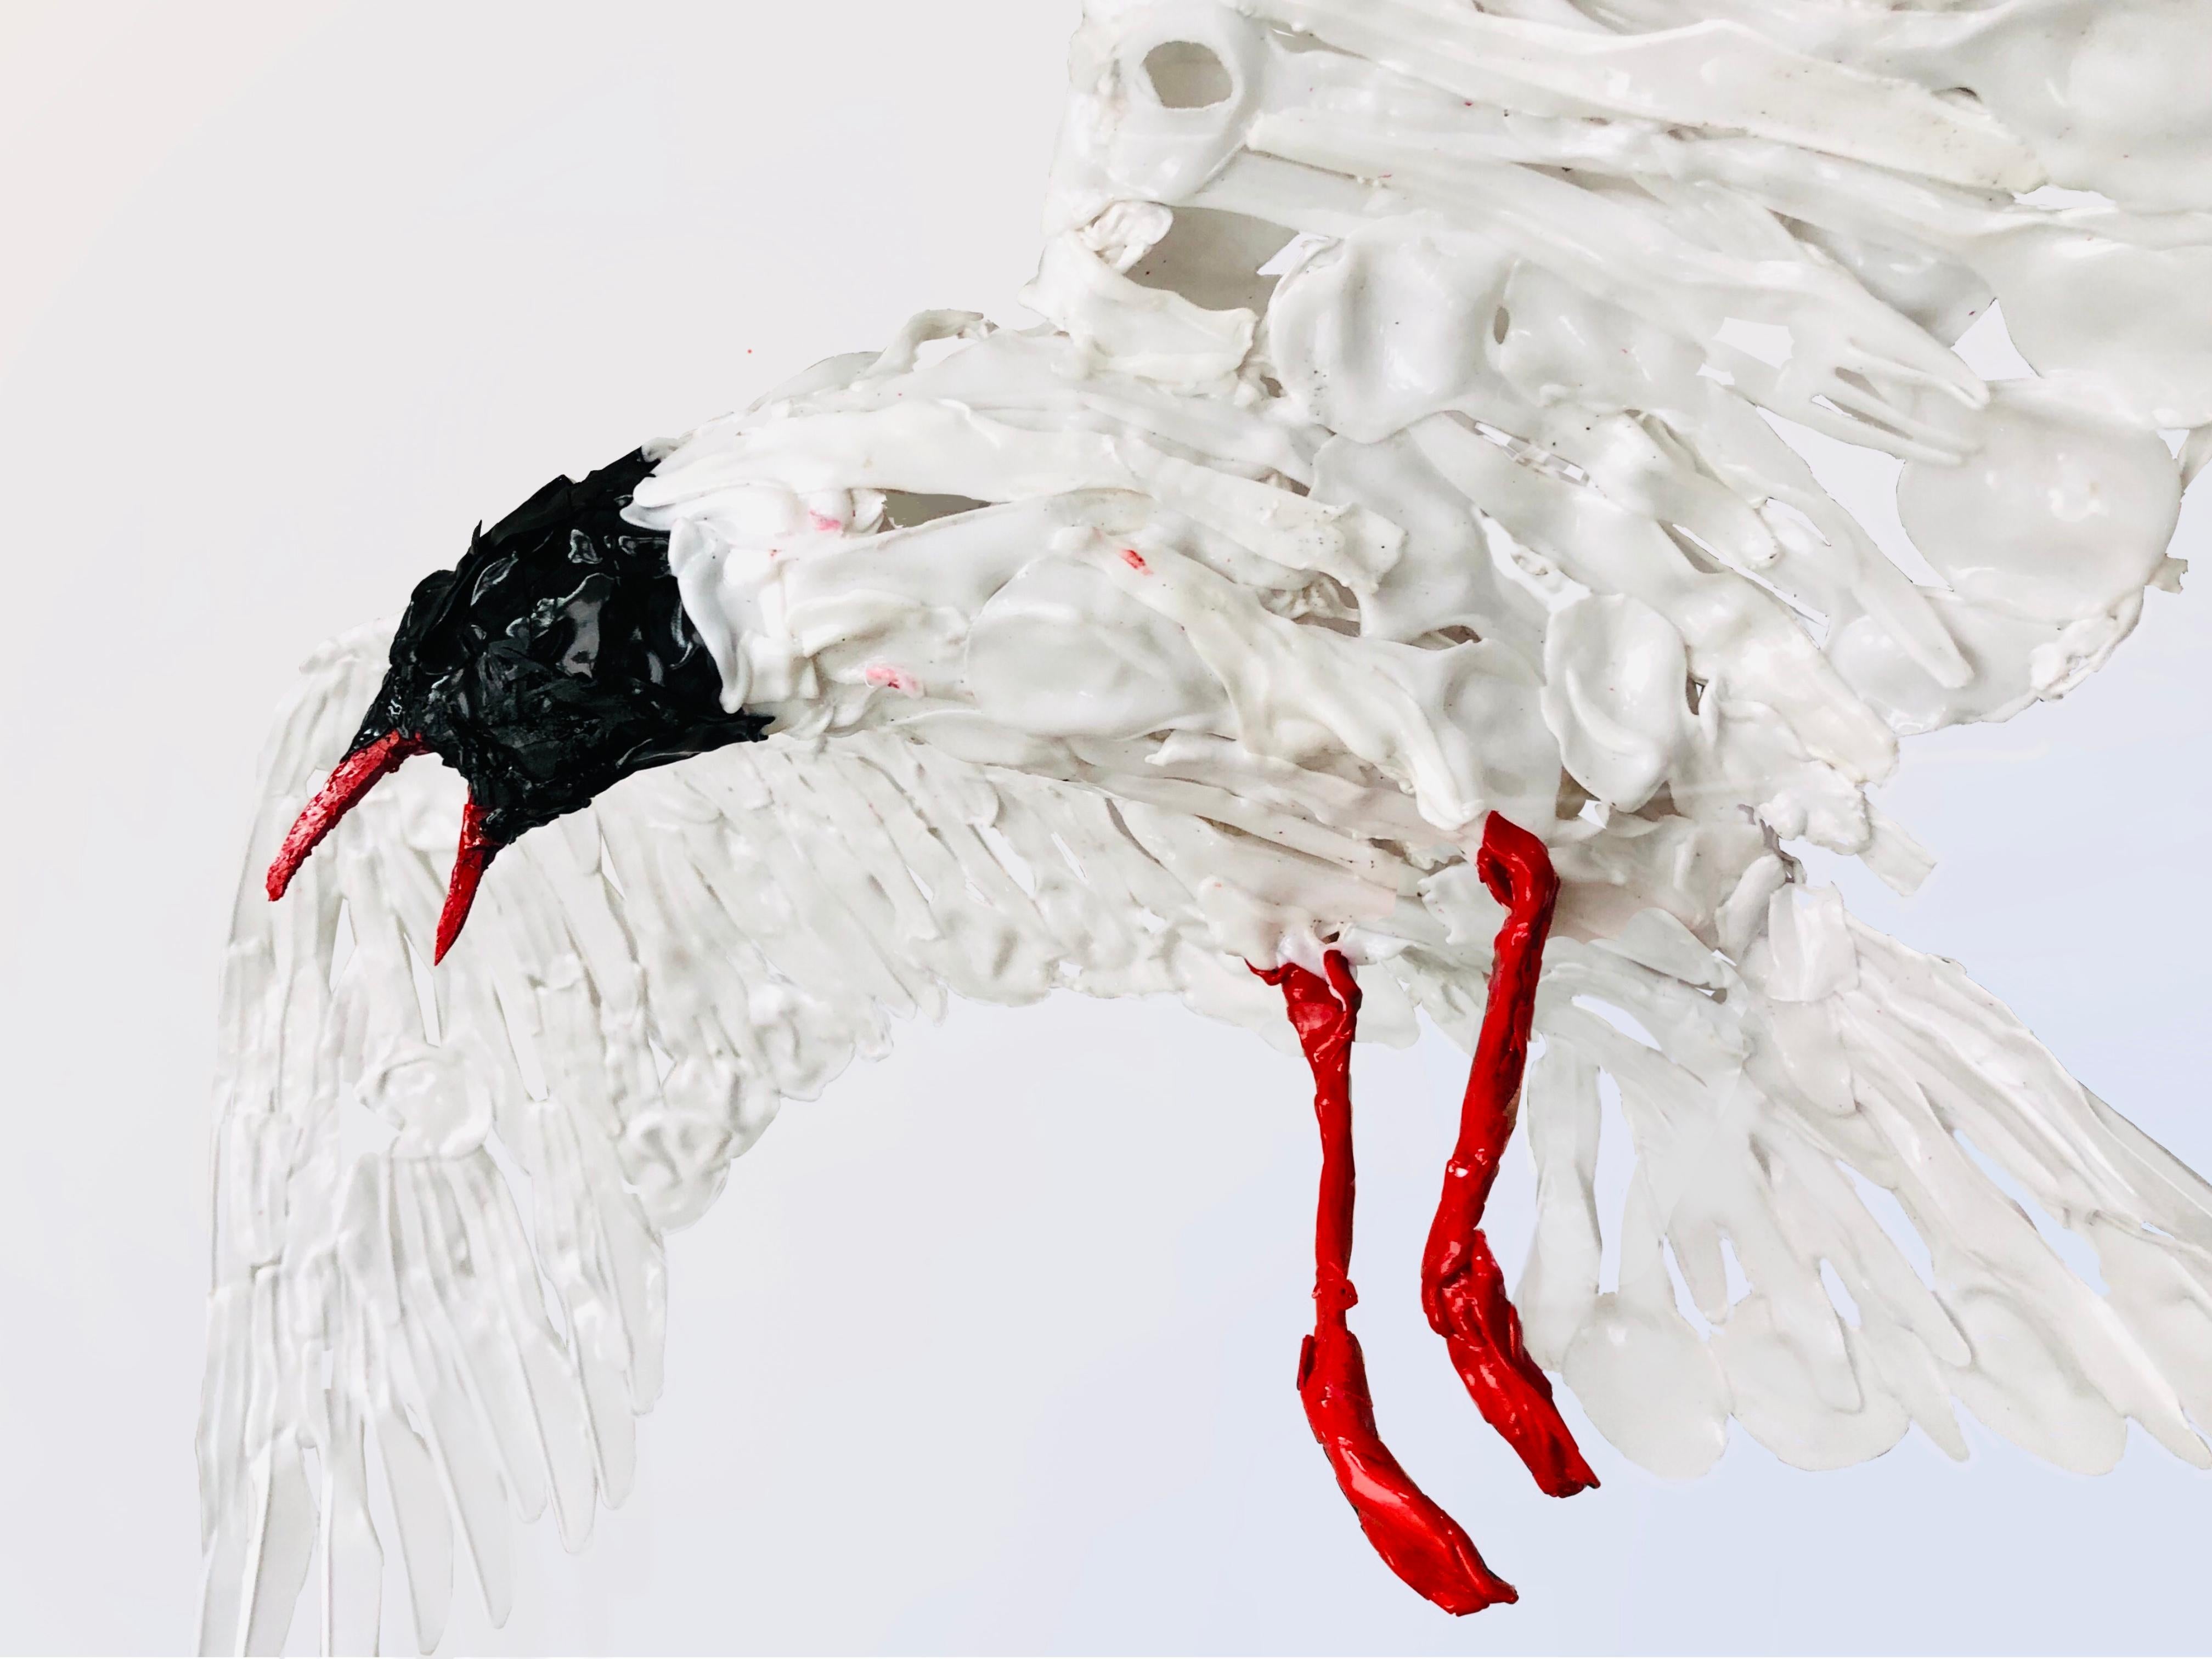 Seagull- 21st Century Sculpture of a Bird made out of plastic recycled Cutlery - Gray Figurative Sculpture by Eric Schutte